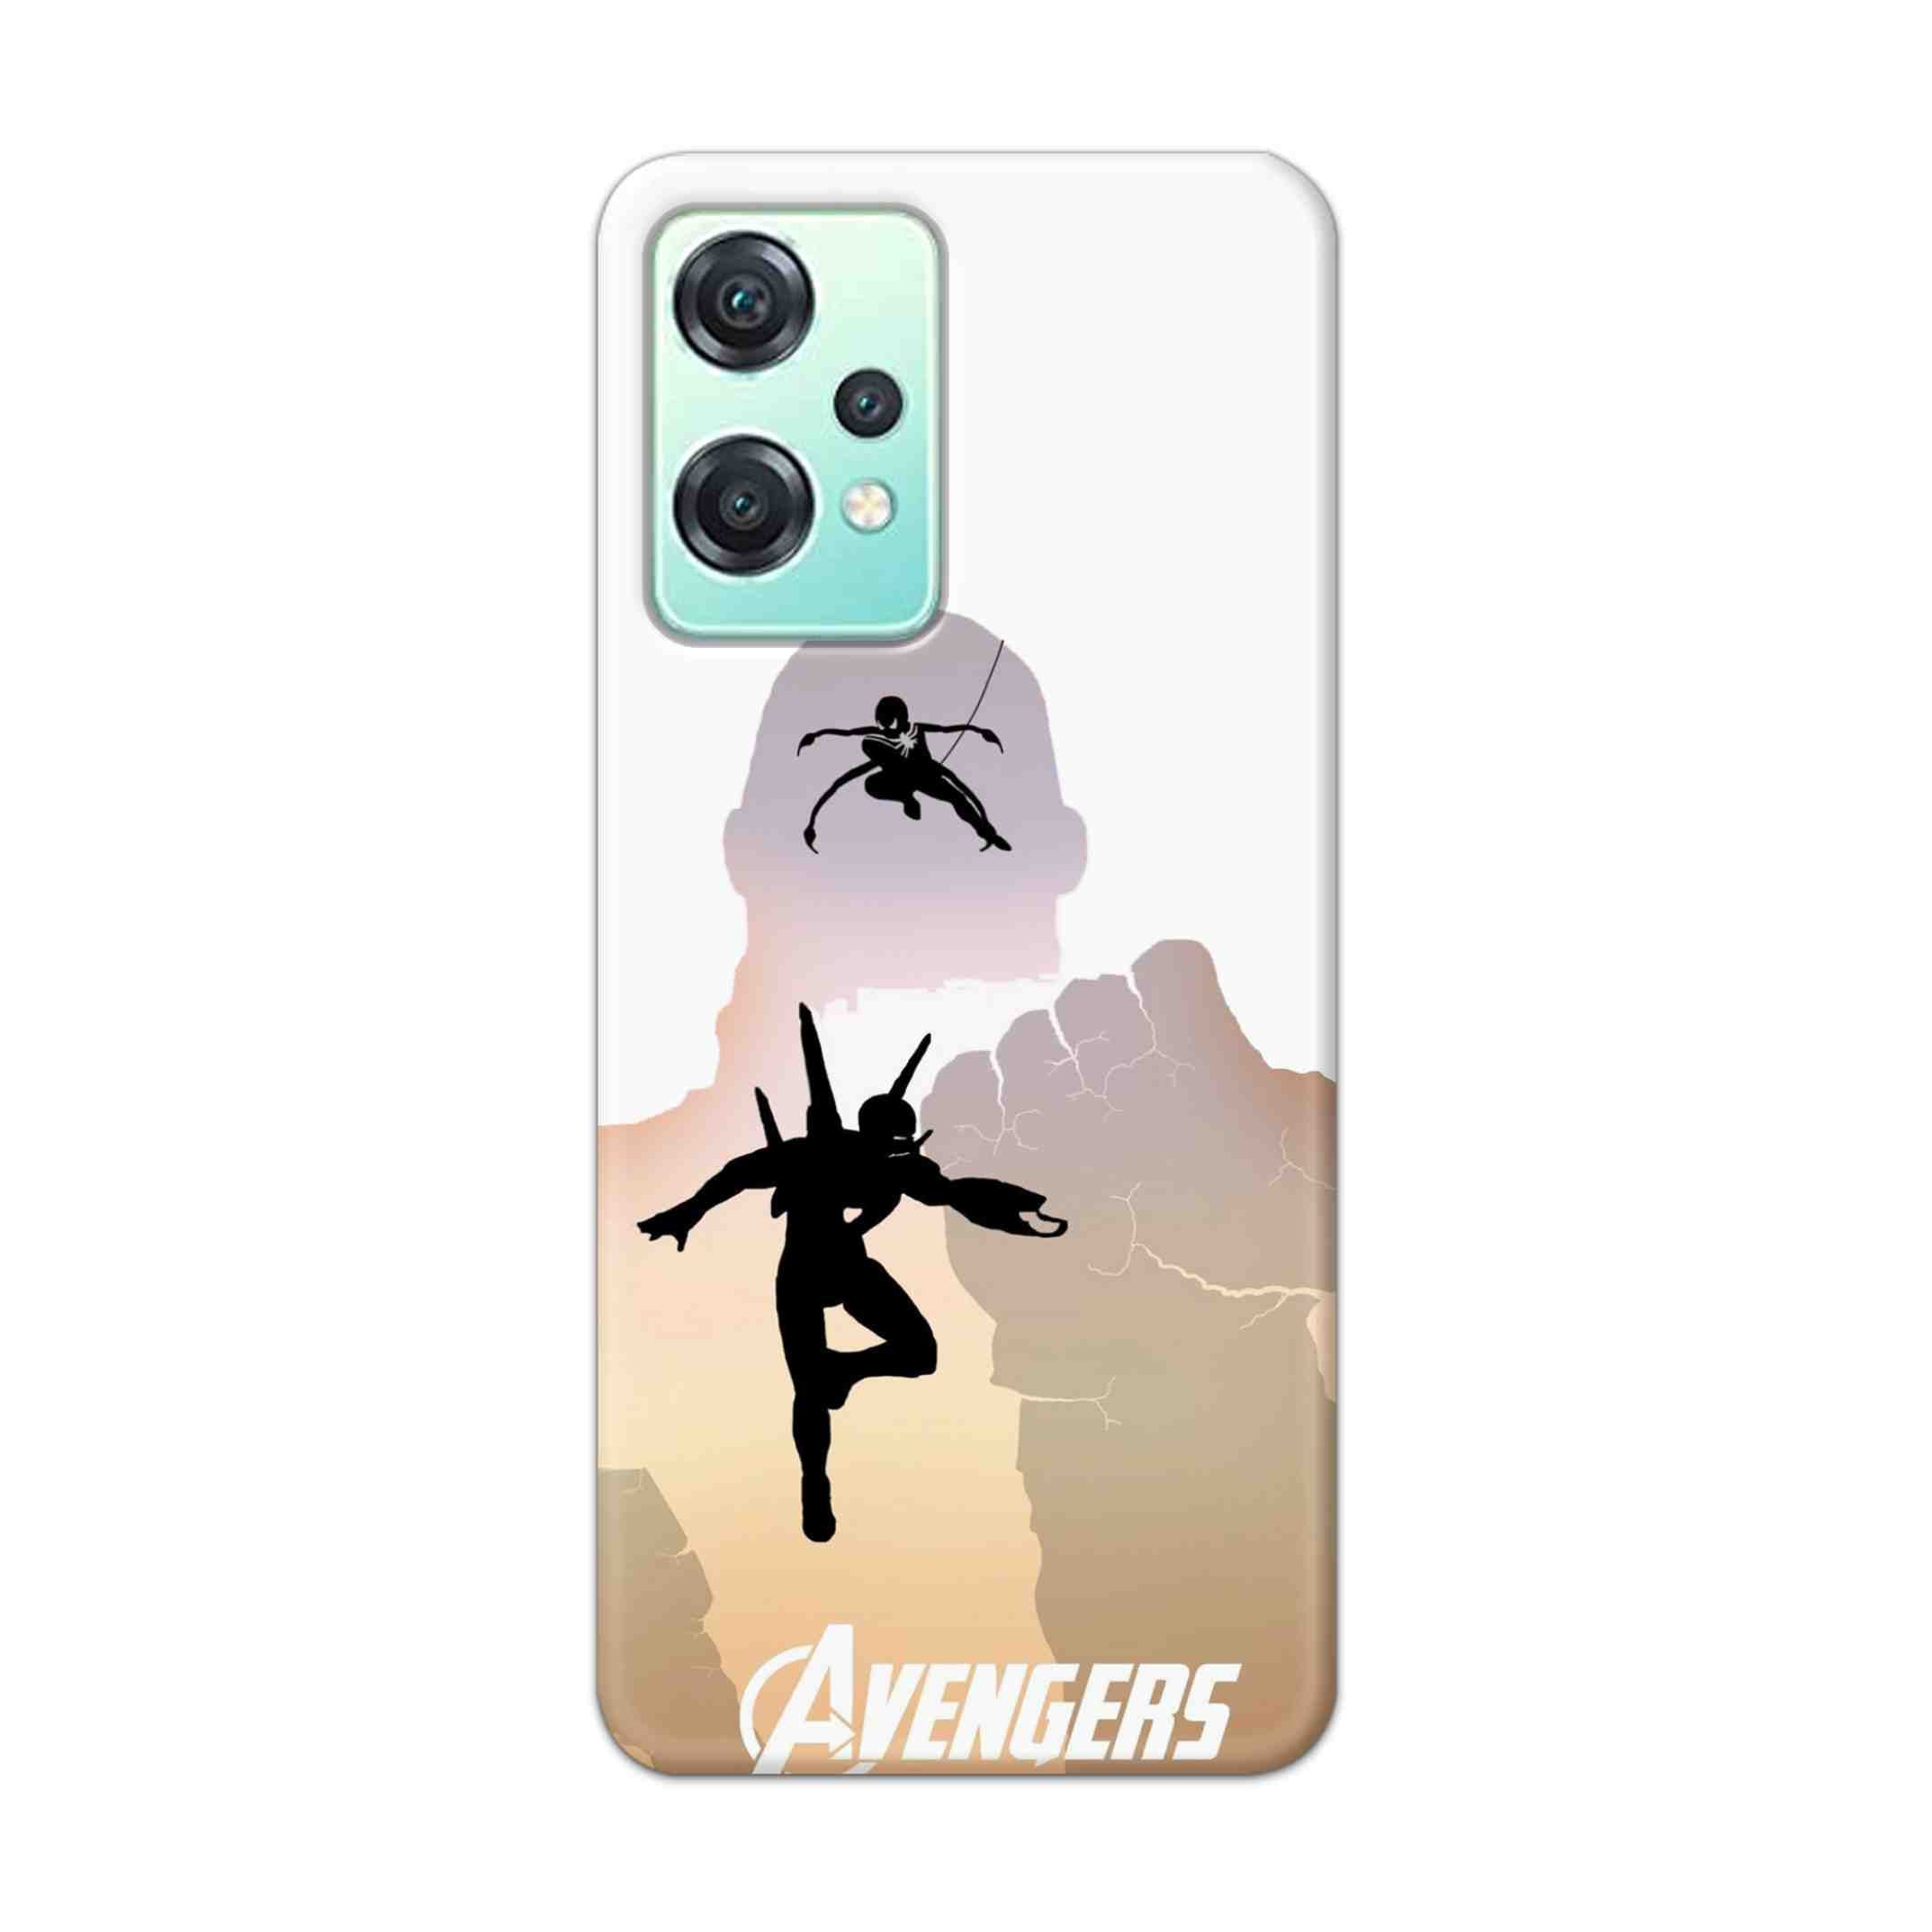 Buy Iron Man Vs Spiderman Hard Back Mobile Phone Case Cover For OnePlus Nord CE 2 Lite 5G Online